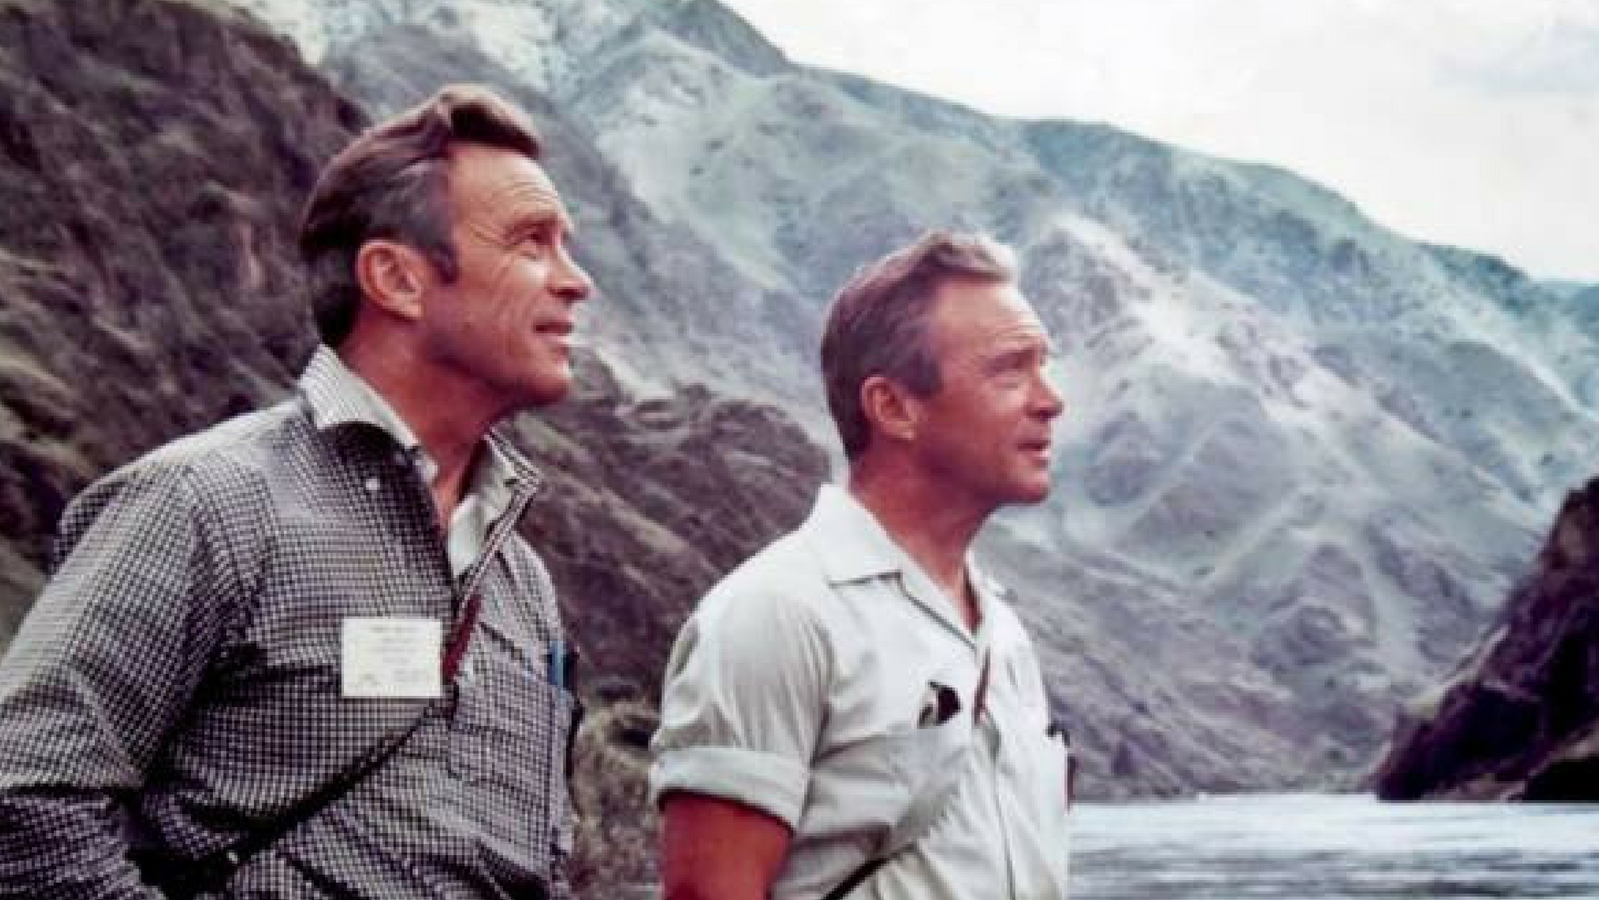 John and Frank Craighead, are shown in Hells Canyon in 1970.